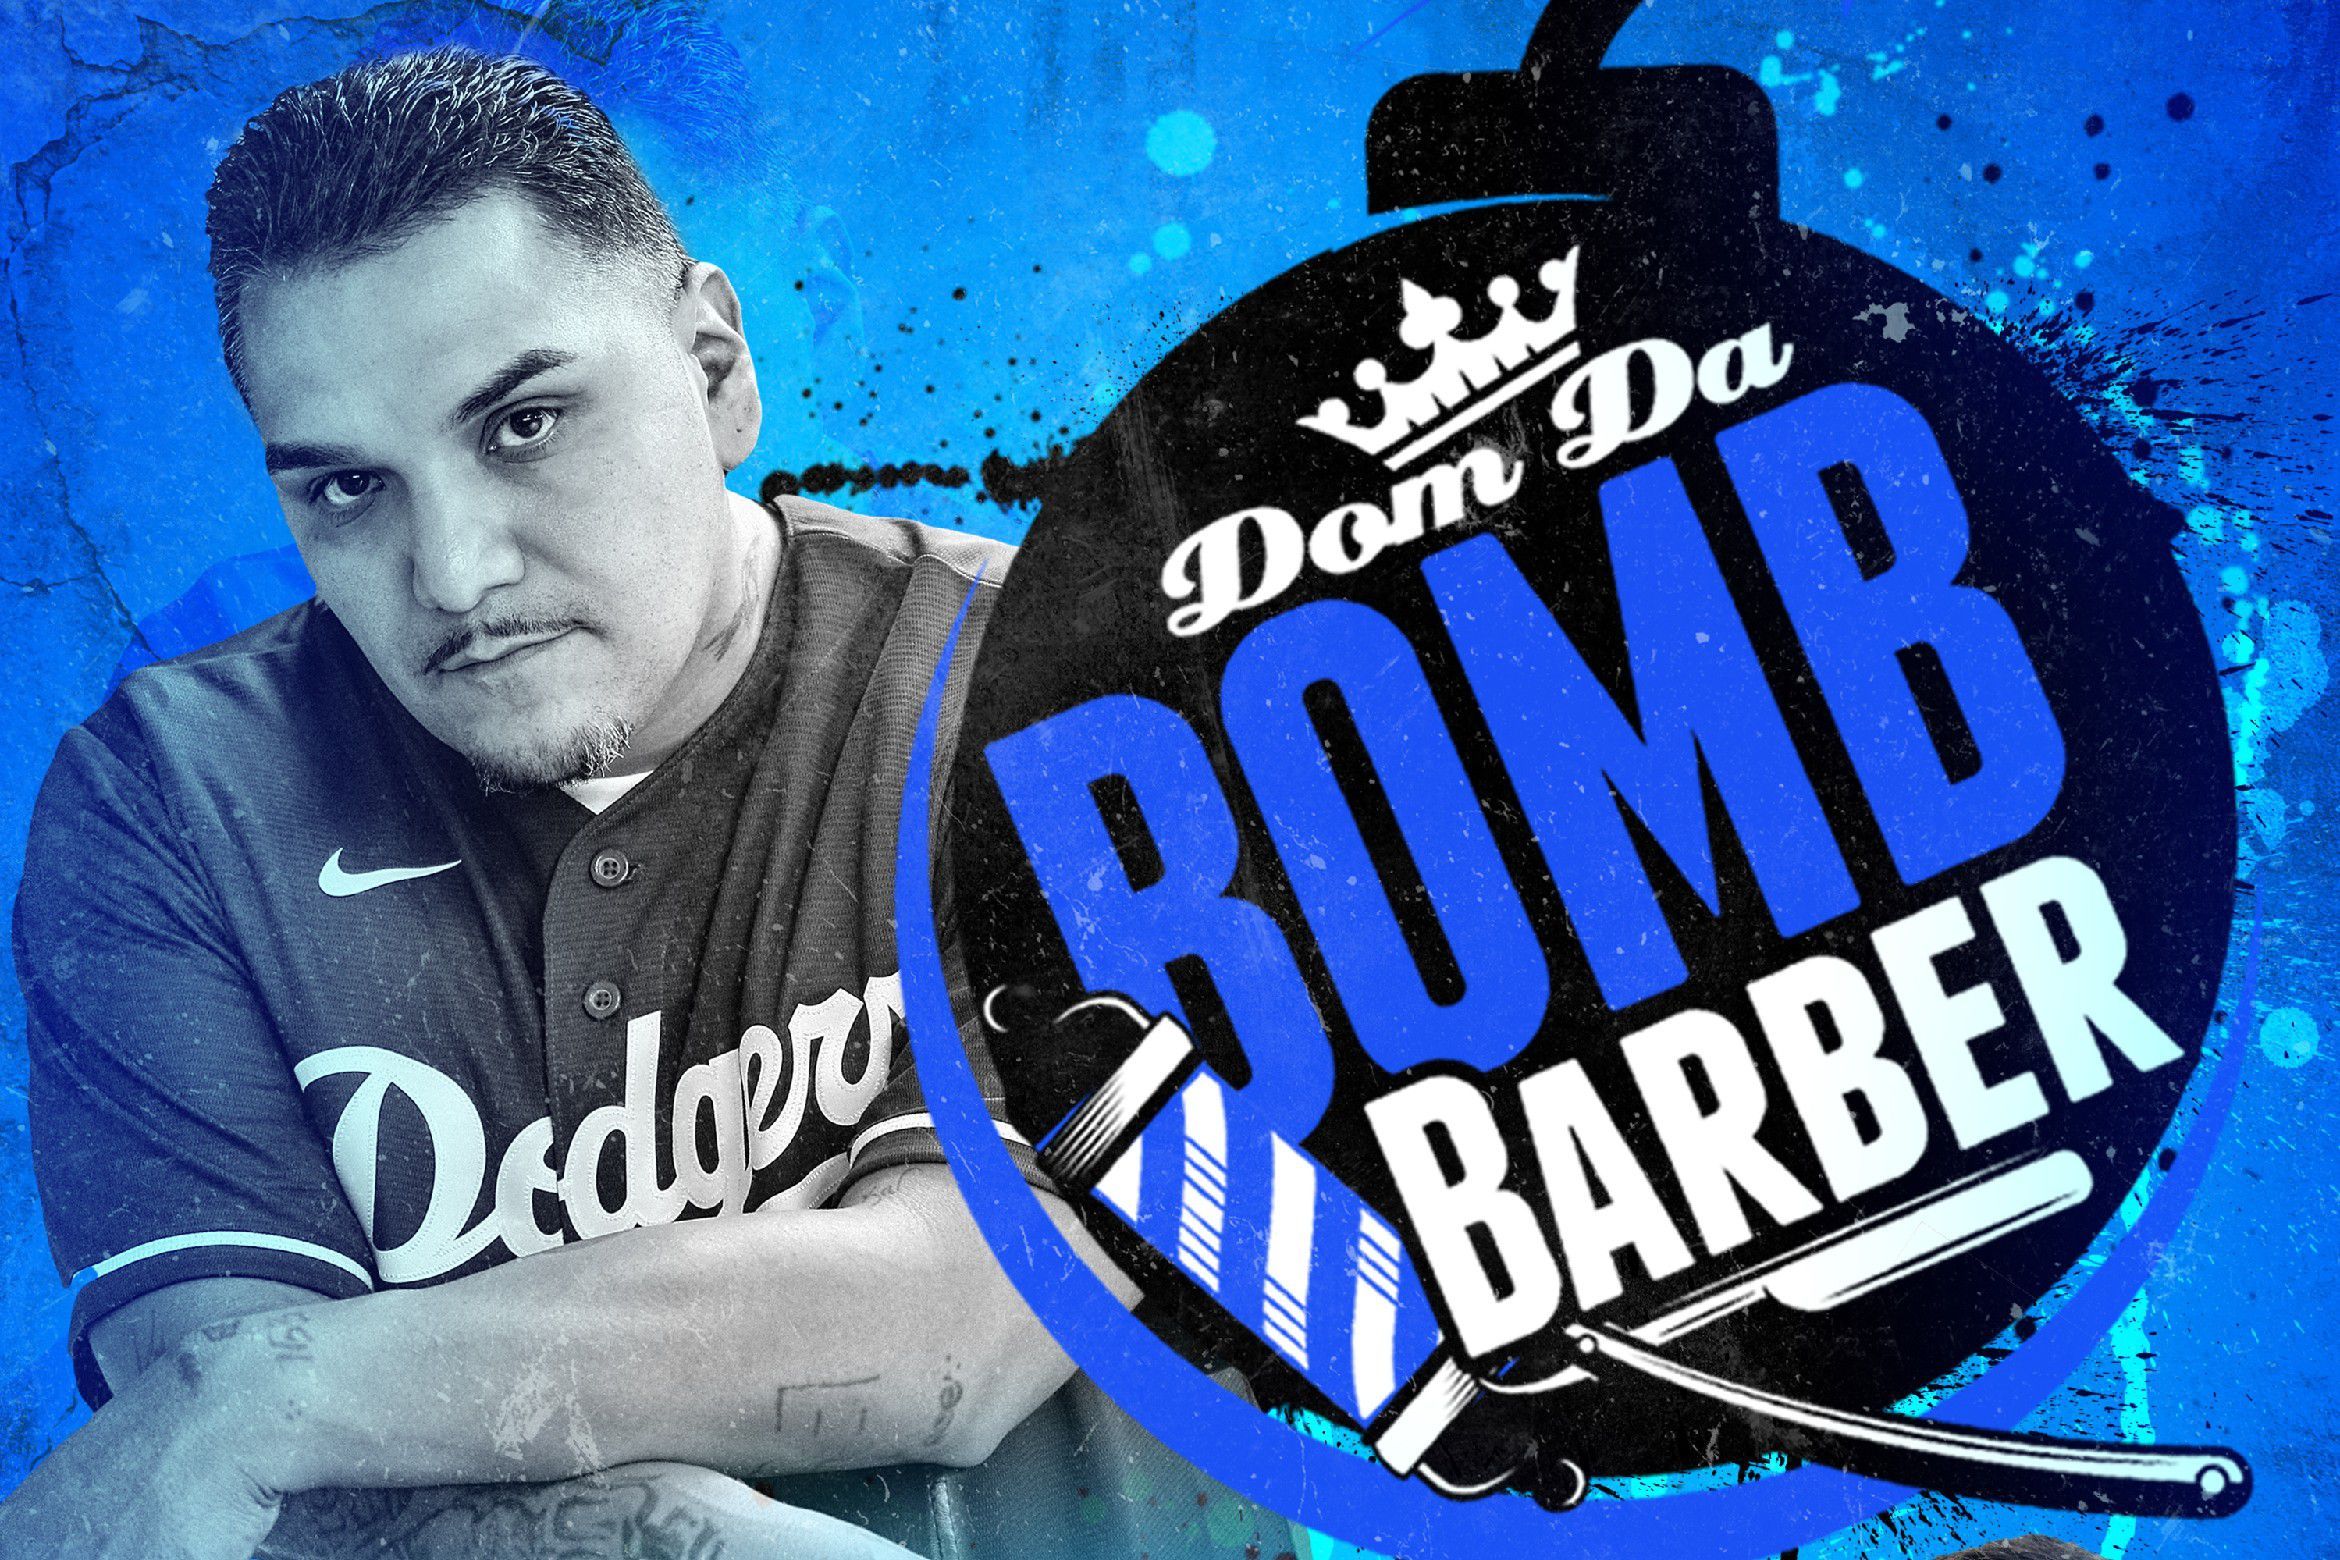 DOM DA BOMB BARBER - Nampa, ID - Book Online - Prices, Reviews, Photos